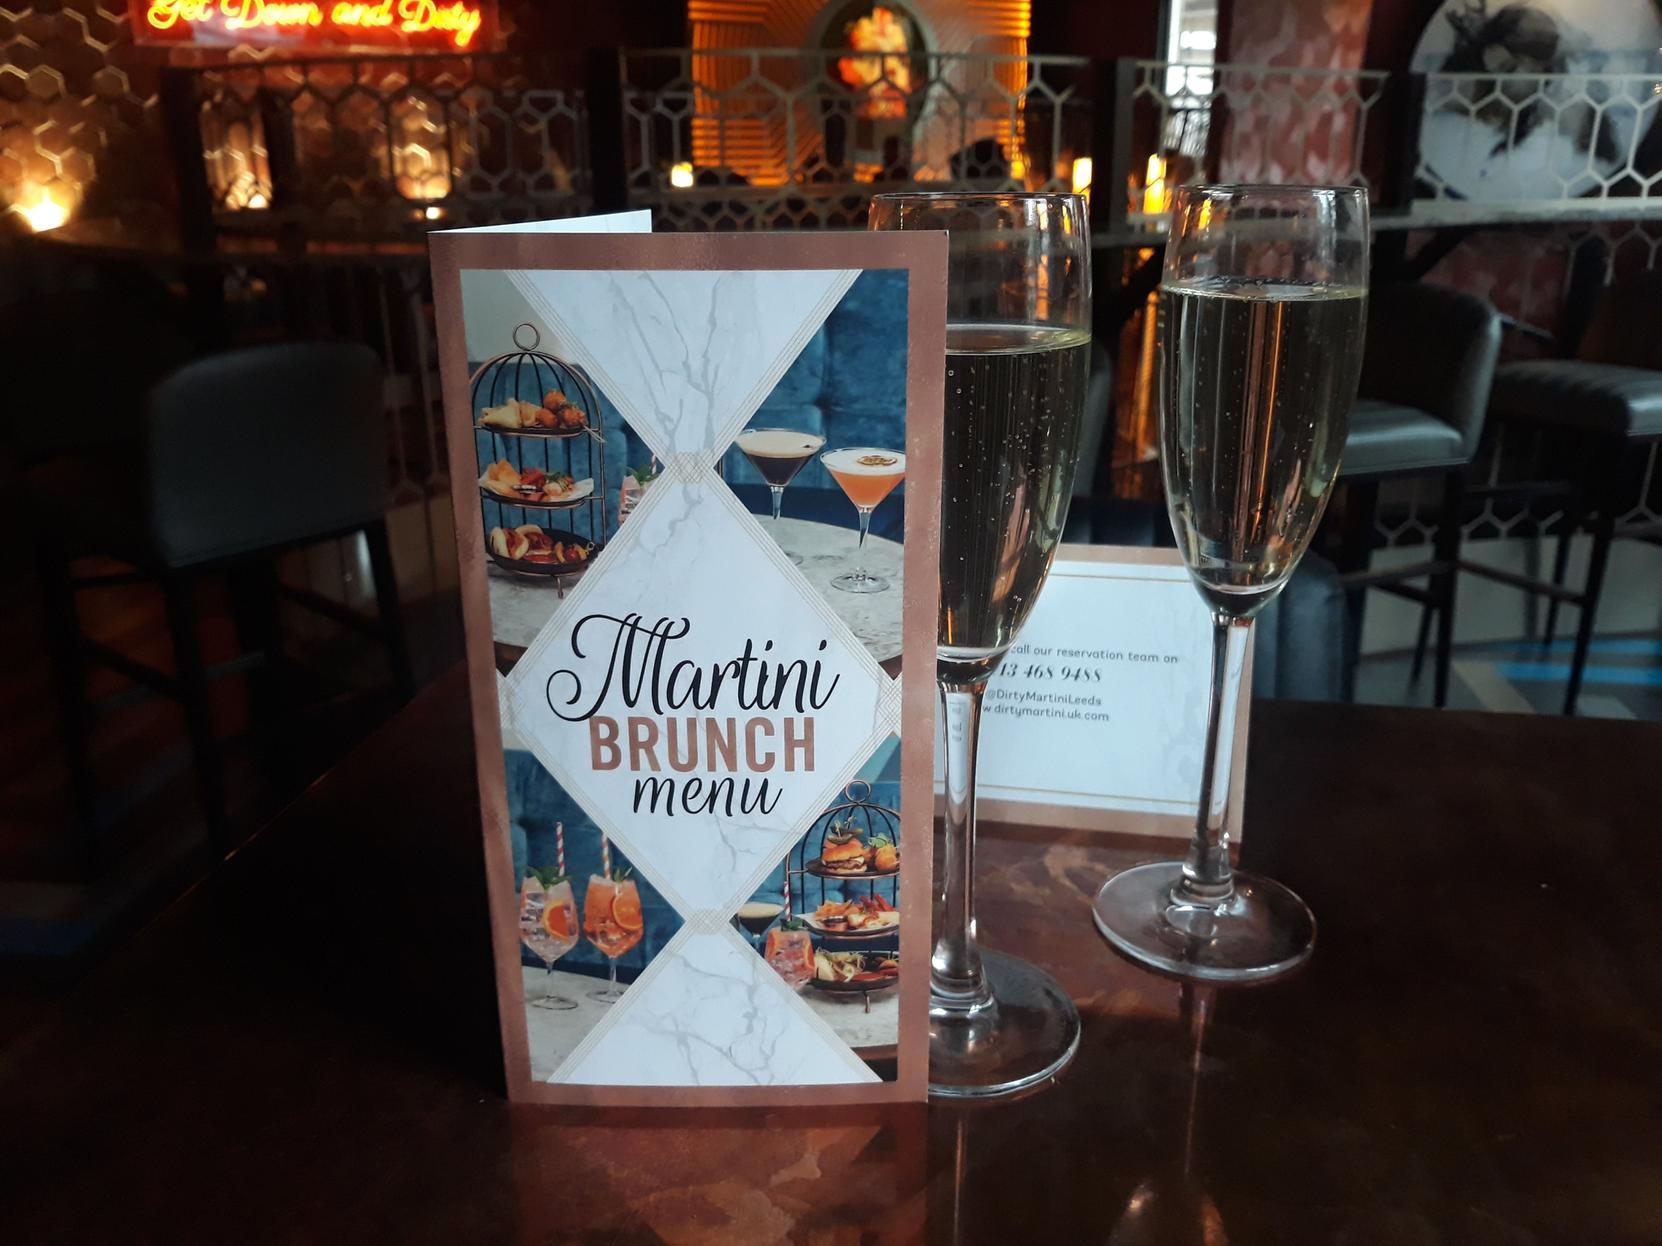 Dirty Martini offer weekend brunch for 30pp, with your choice of Bottomless Pink & Blood Orange G&Ts, Martinis and Prosecco for 90 minutes